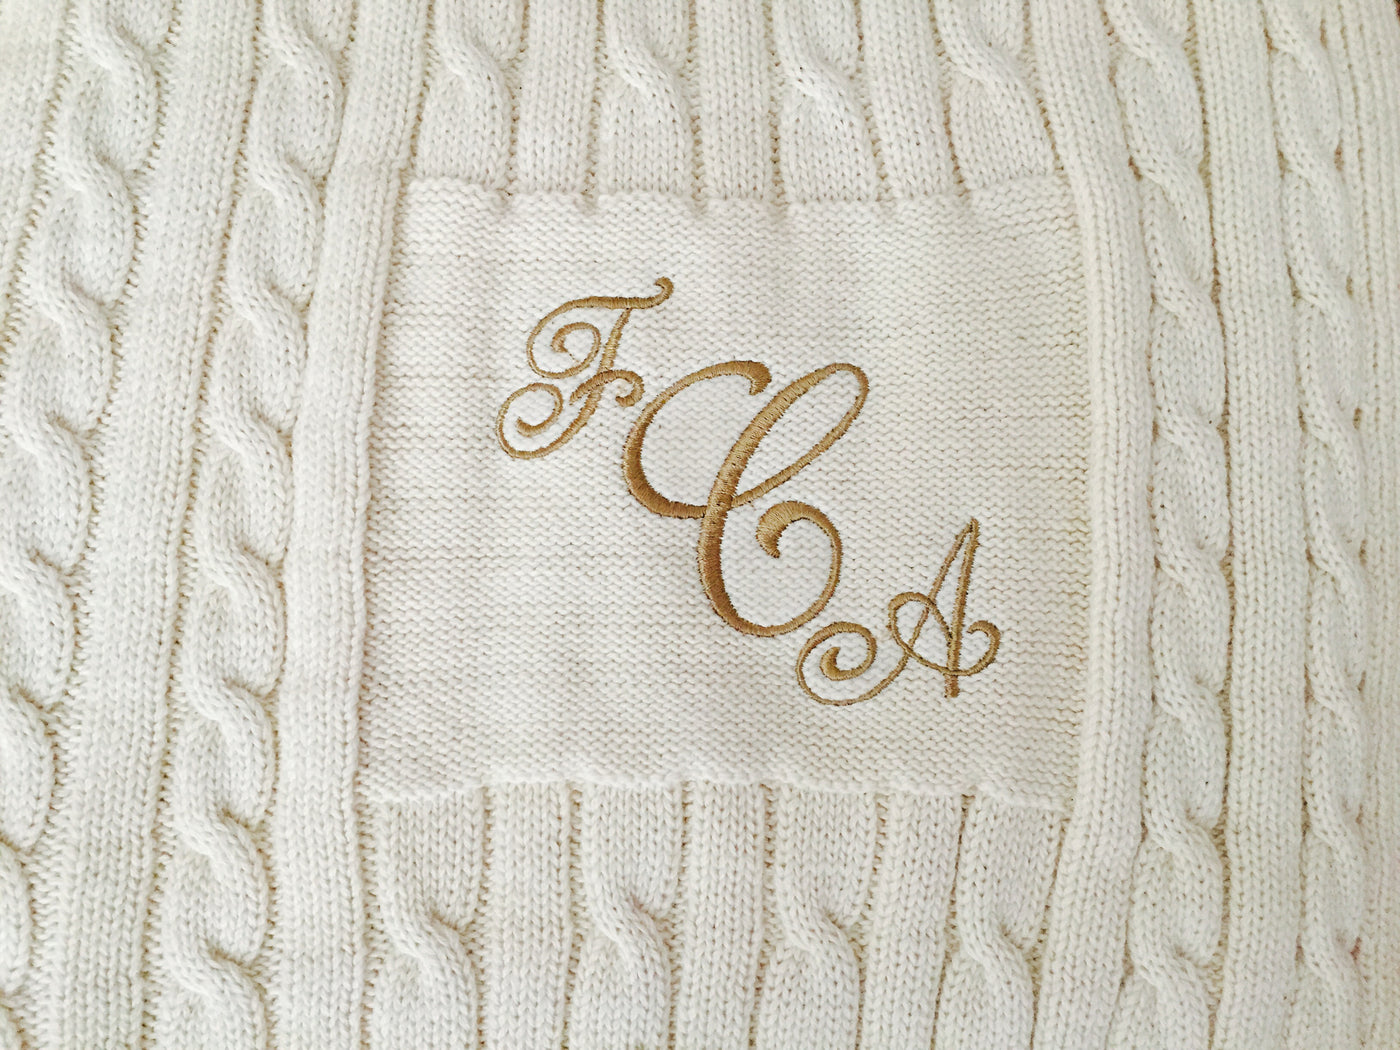 Classic Cotton 6 Needle Blanket Embroidered with a Monogram